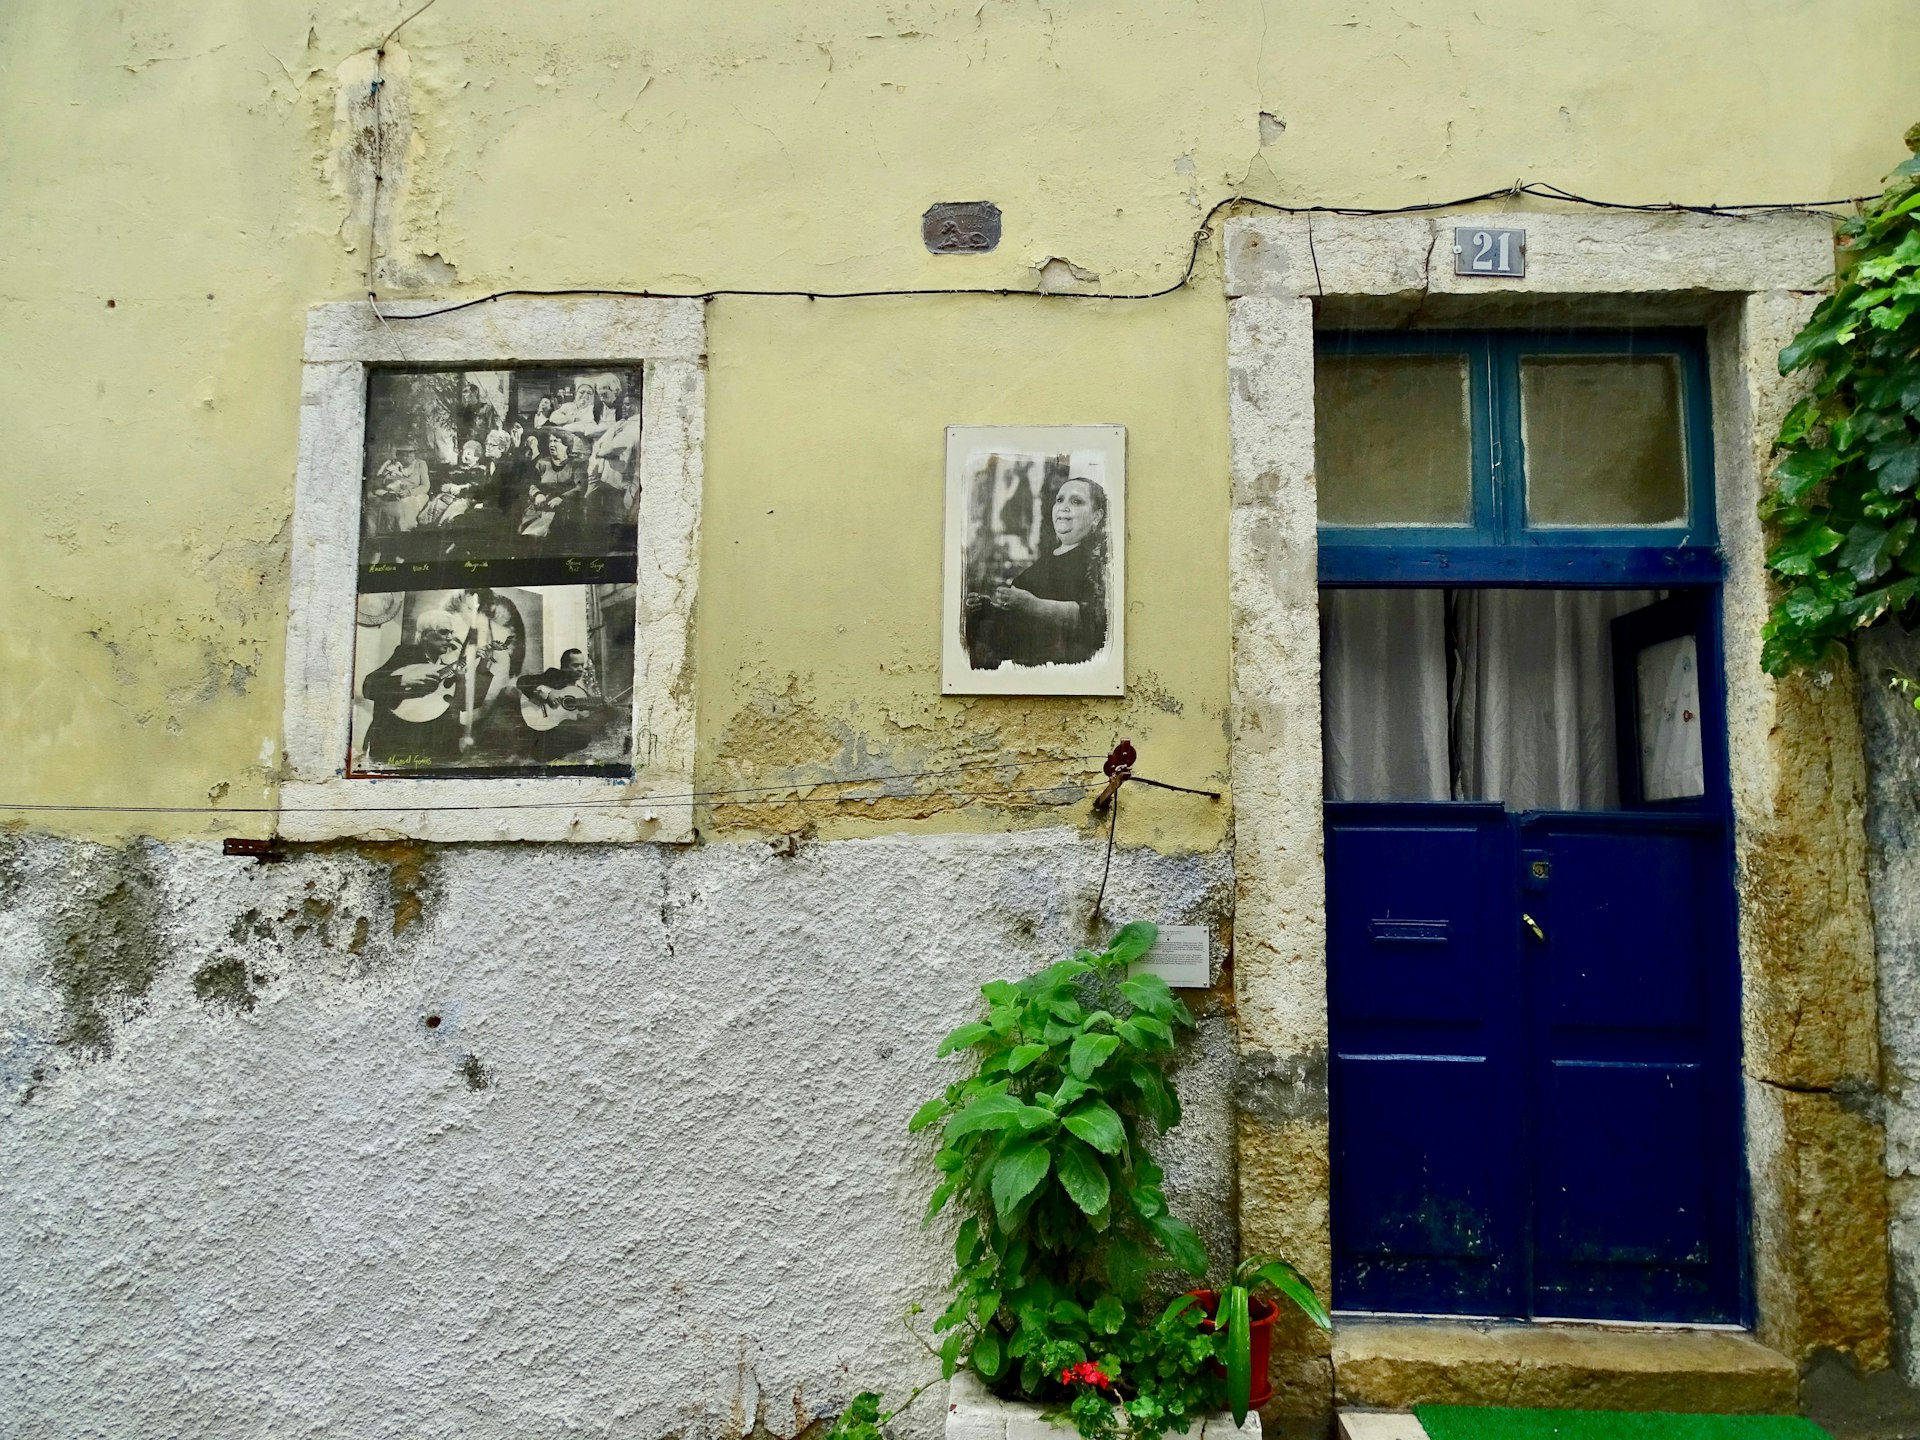 Black and white photographic street art in place of a window on the side of a house in Lisbon.